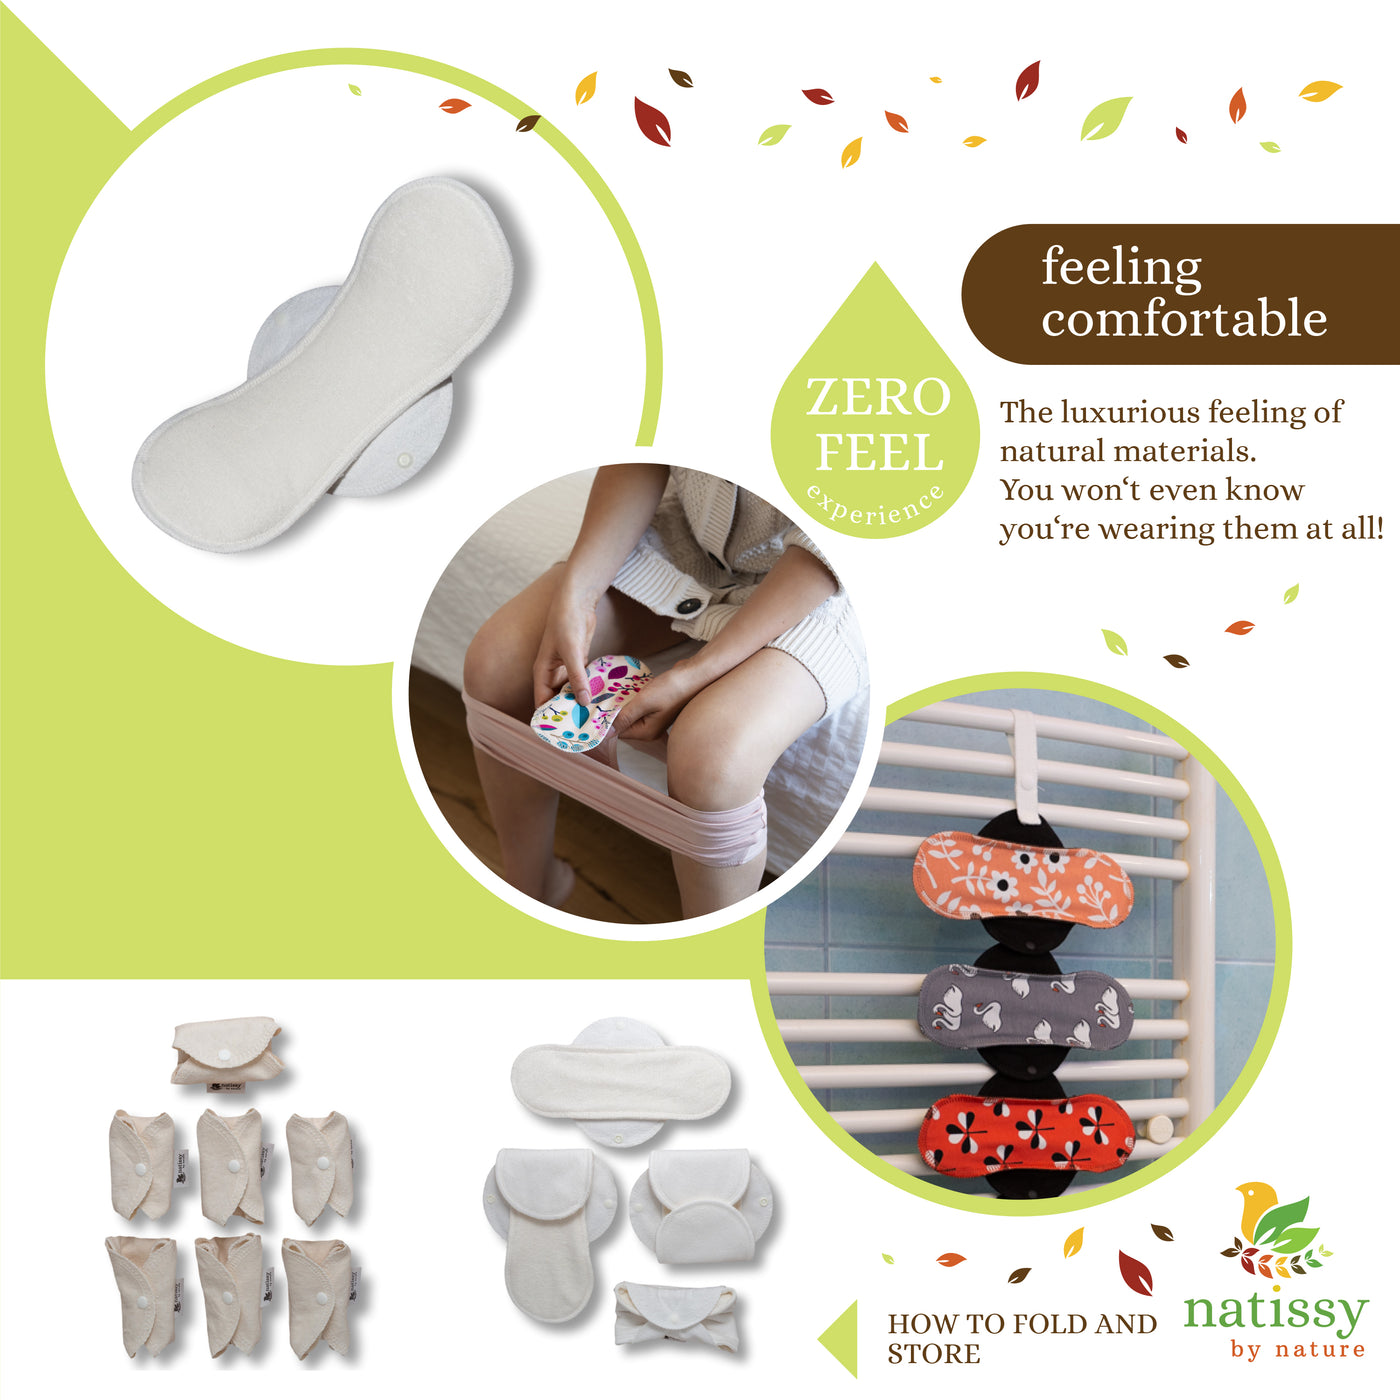 Reusable Panty liners, 7-Pack of Organic Bamboo Reusable Sanitary Pantyliners with Wings; MADE IN EU; for Vaginal Discharge and Everyday Cleanliness; Non-irritating, Anti-allergic, Antibacterial; for Daily Usage and in case of White Discharge; Washable Cloth Pads w/o Chemicals; Reusable Liners